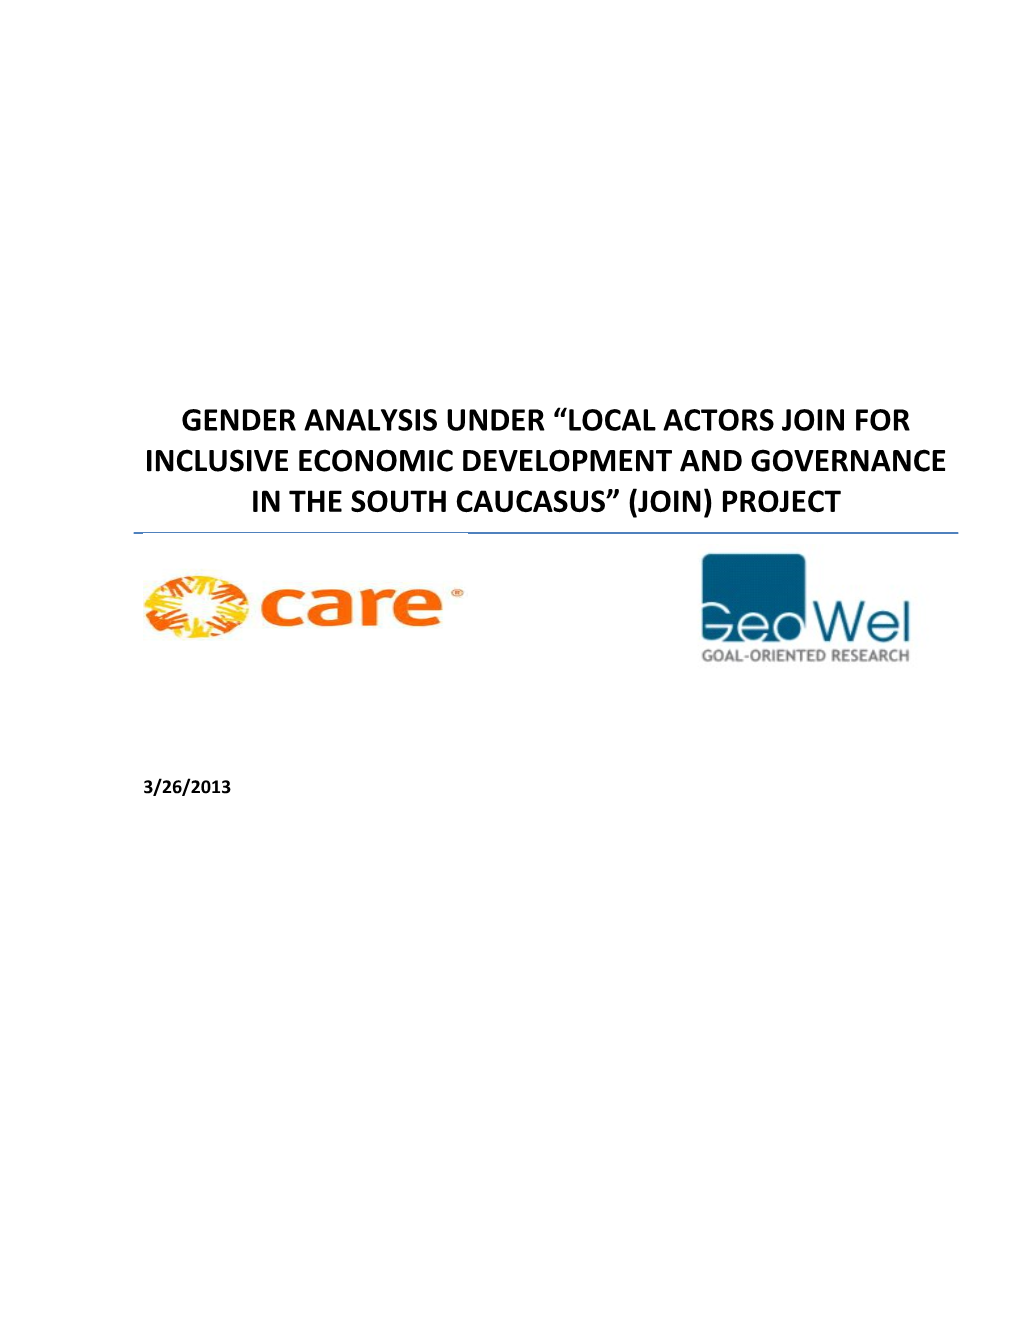 Gender Analysis Under Local Actors Join for Inclusive Economic Development and Governance